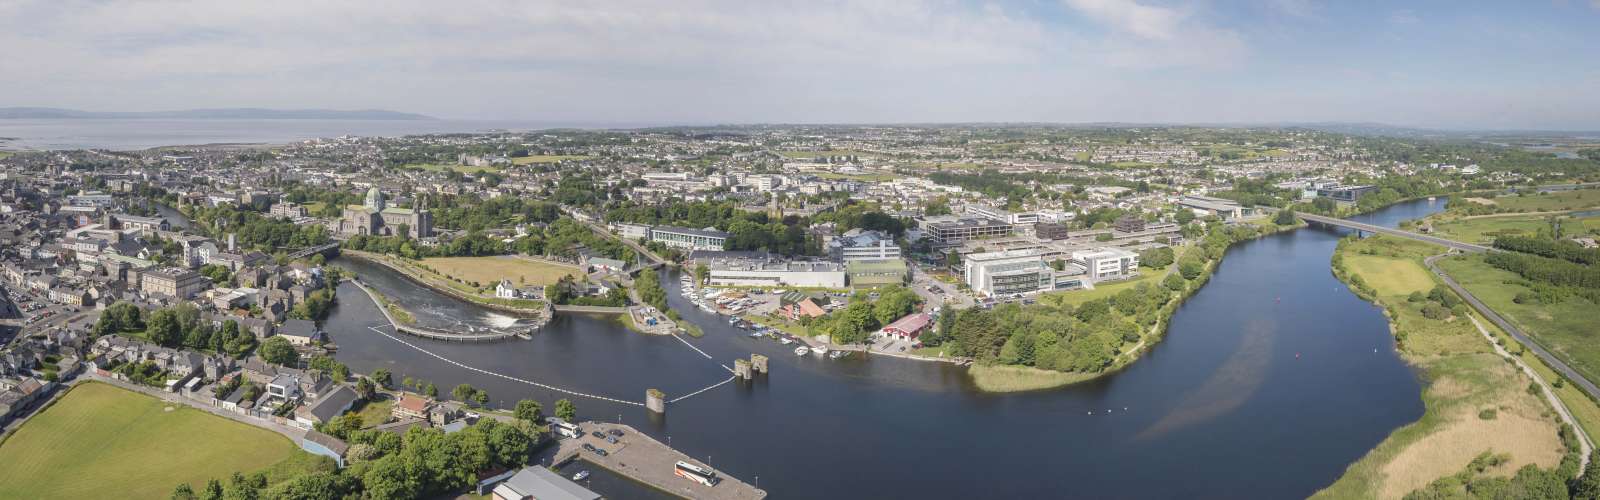 Study Engineering at University of Galway